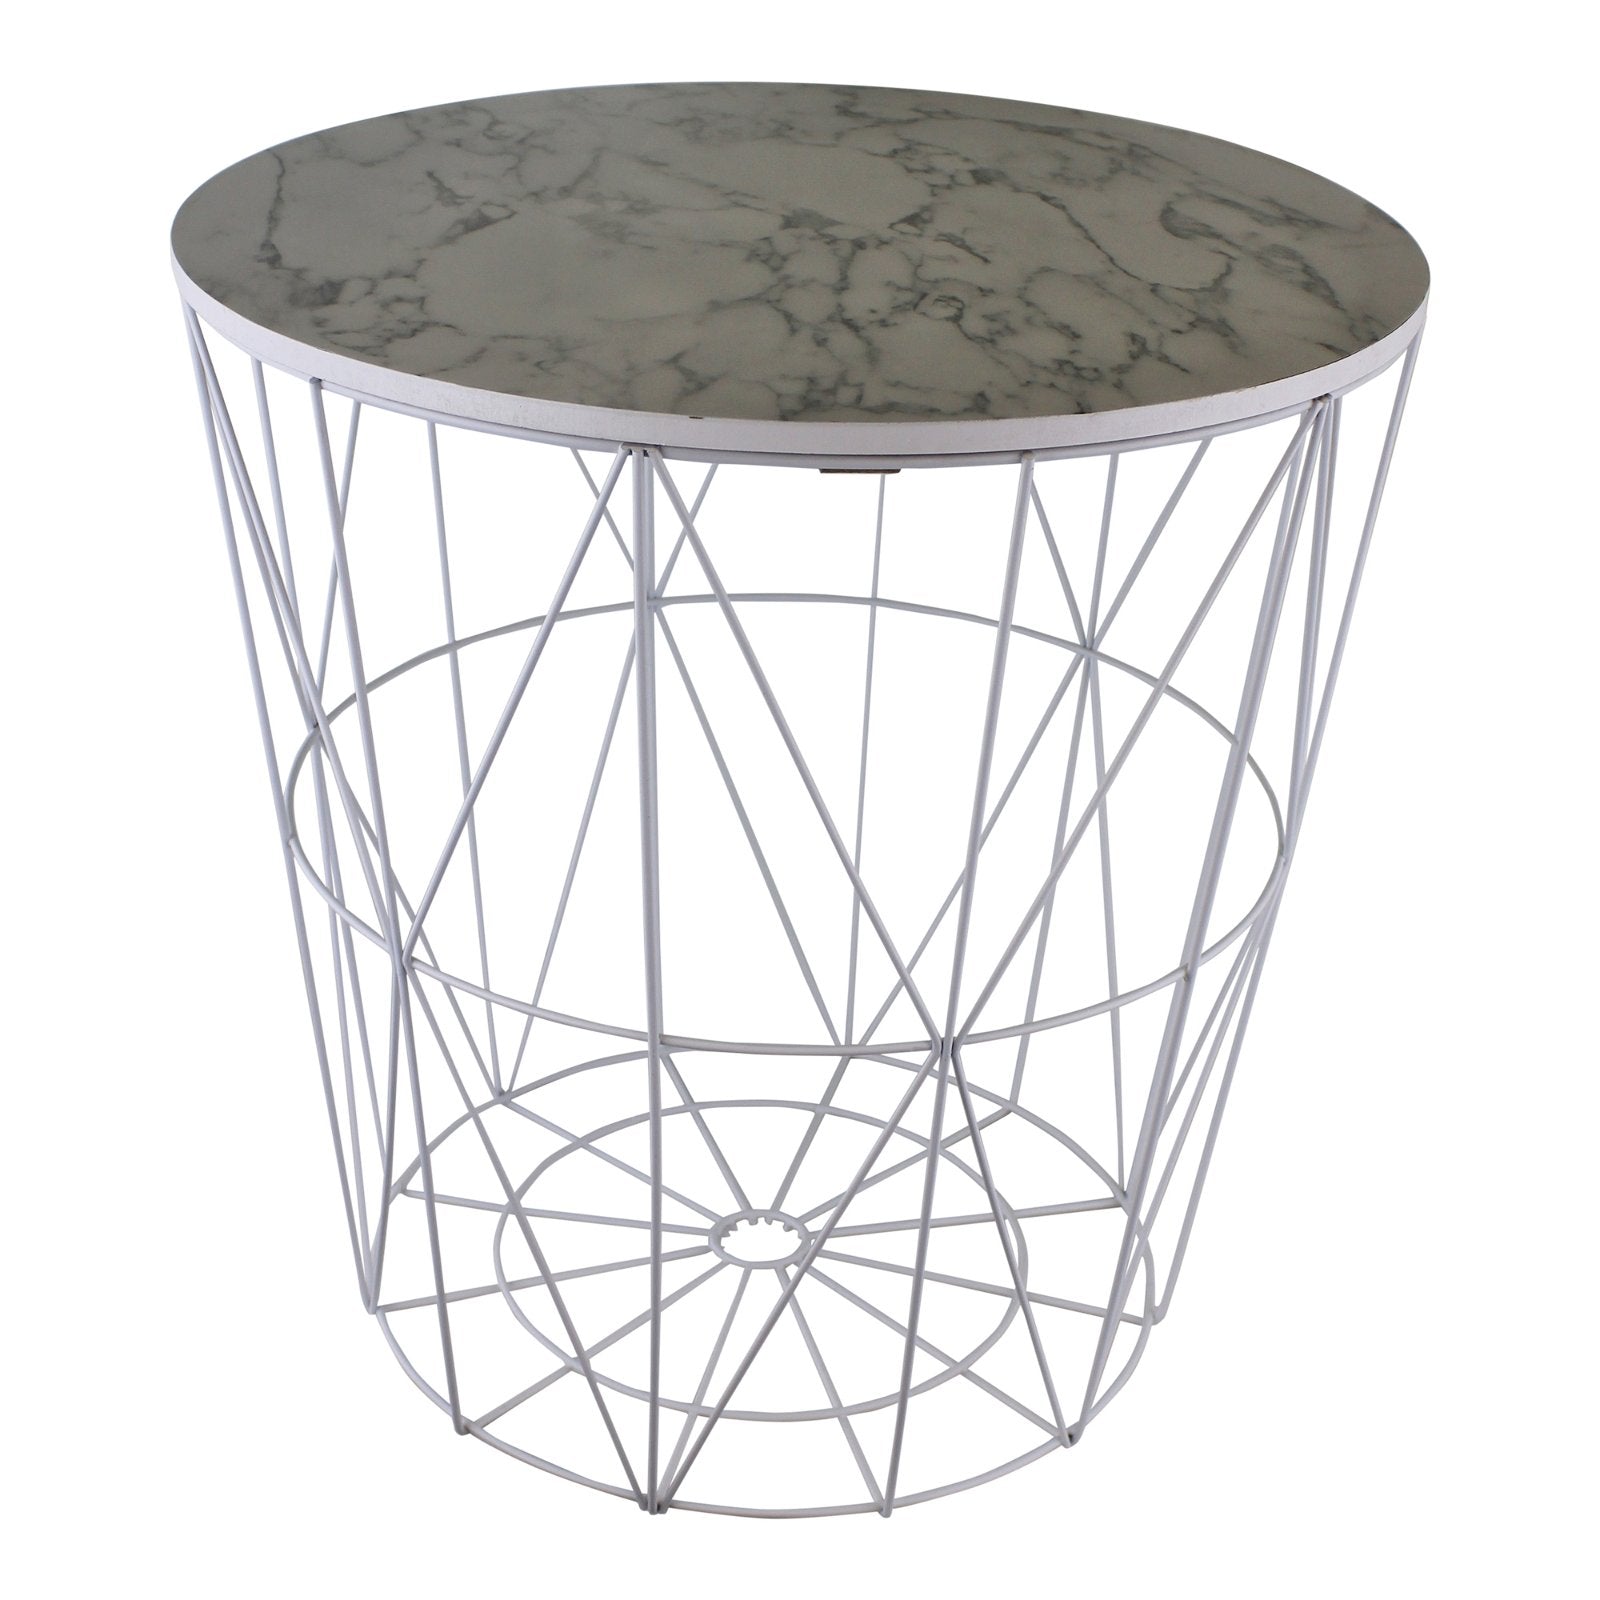 Circular Geometric Side Table White & Marble Effect